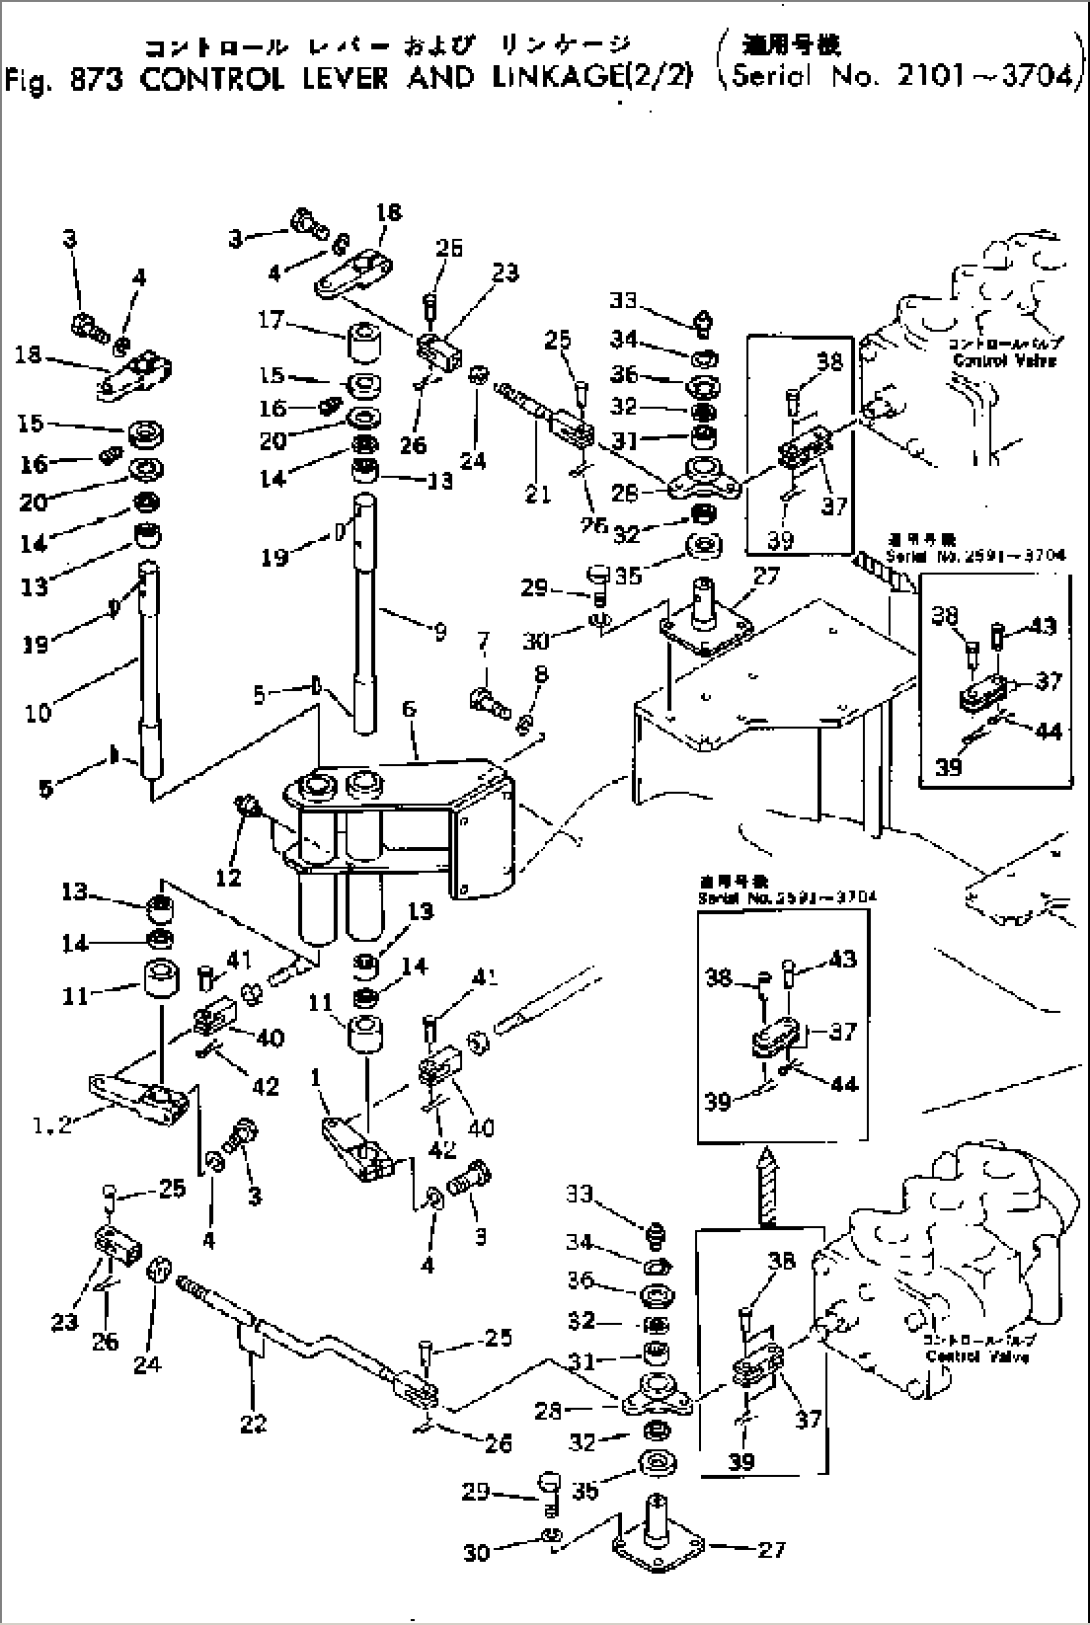 CONTROL LEVER AND LINKAGE (2/2)(#2101-3704)